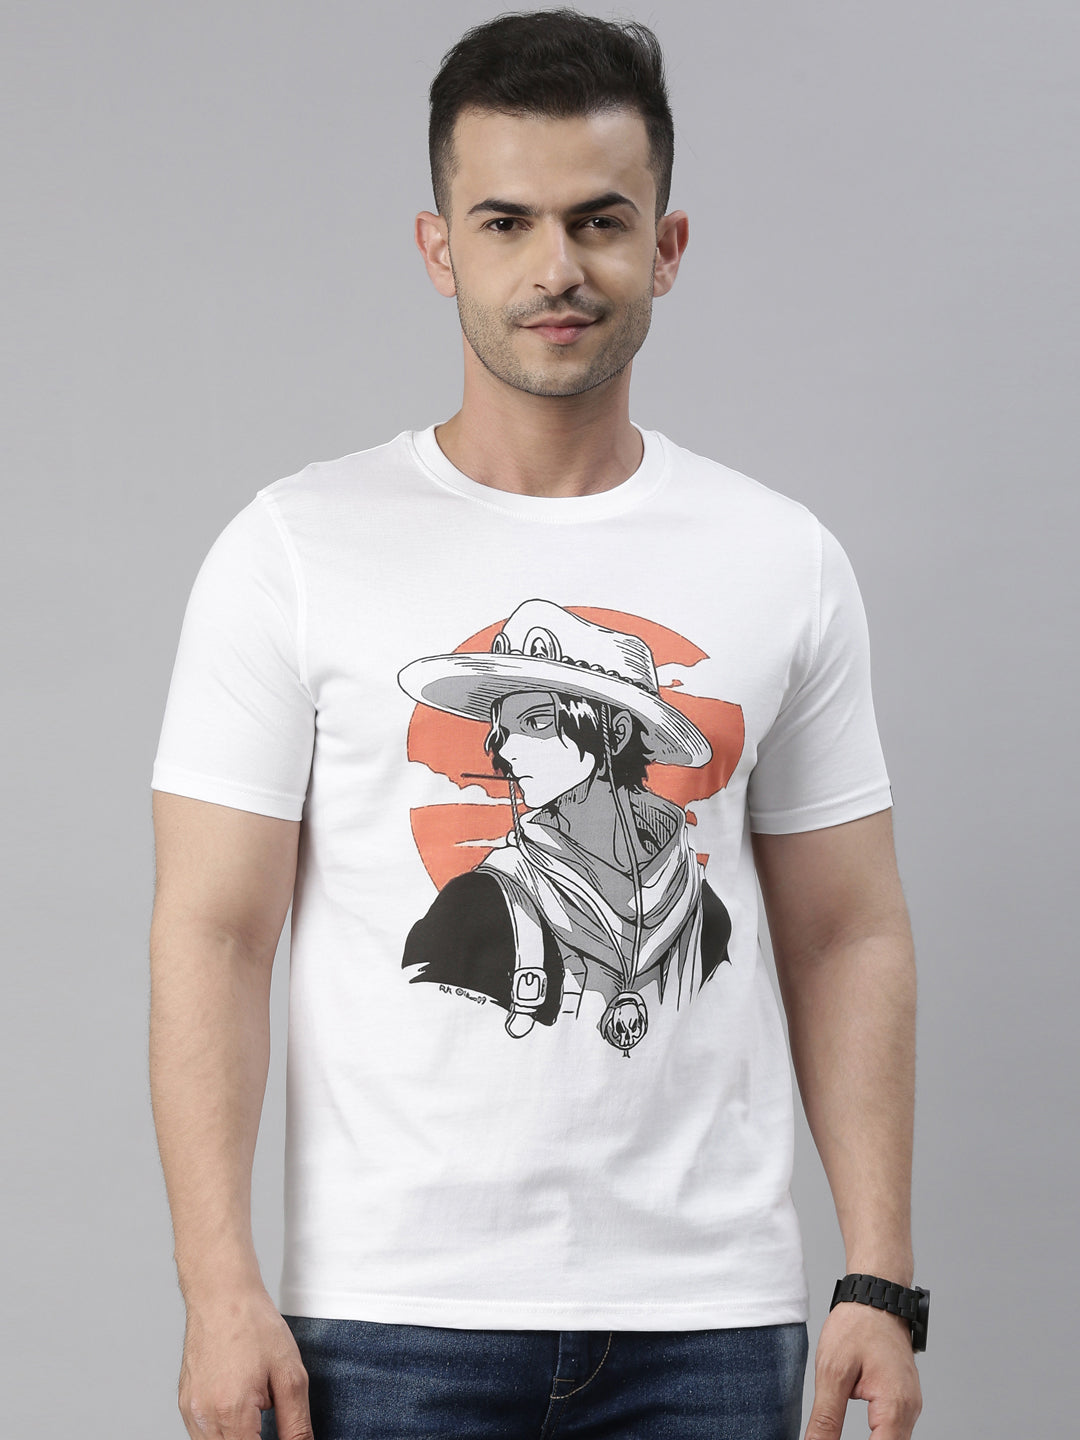 Branded Mens Anime Design TShirts in Pakistan with Best Price